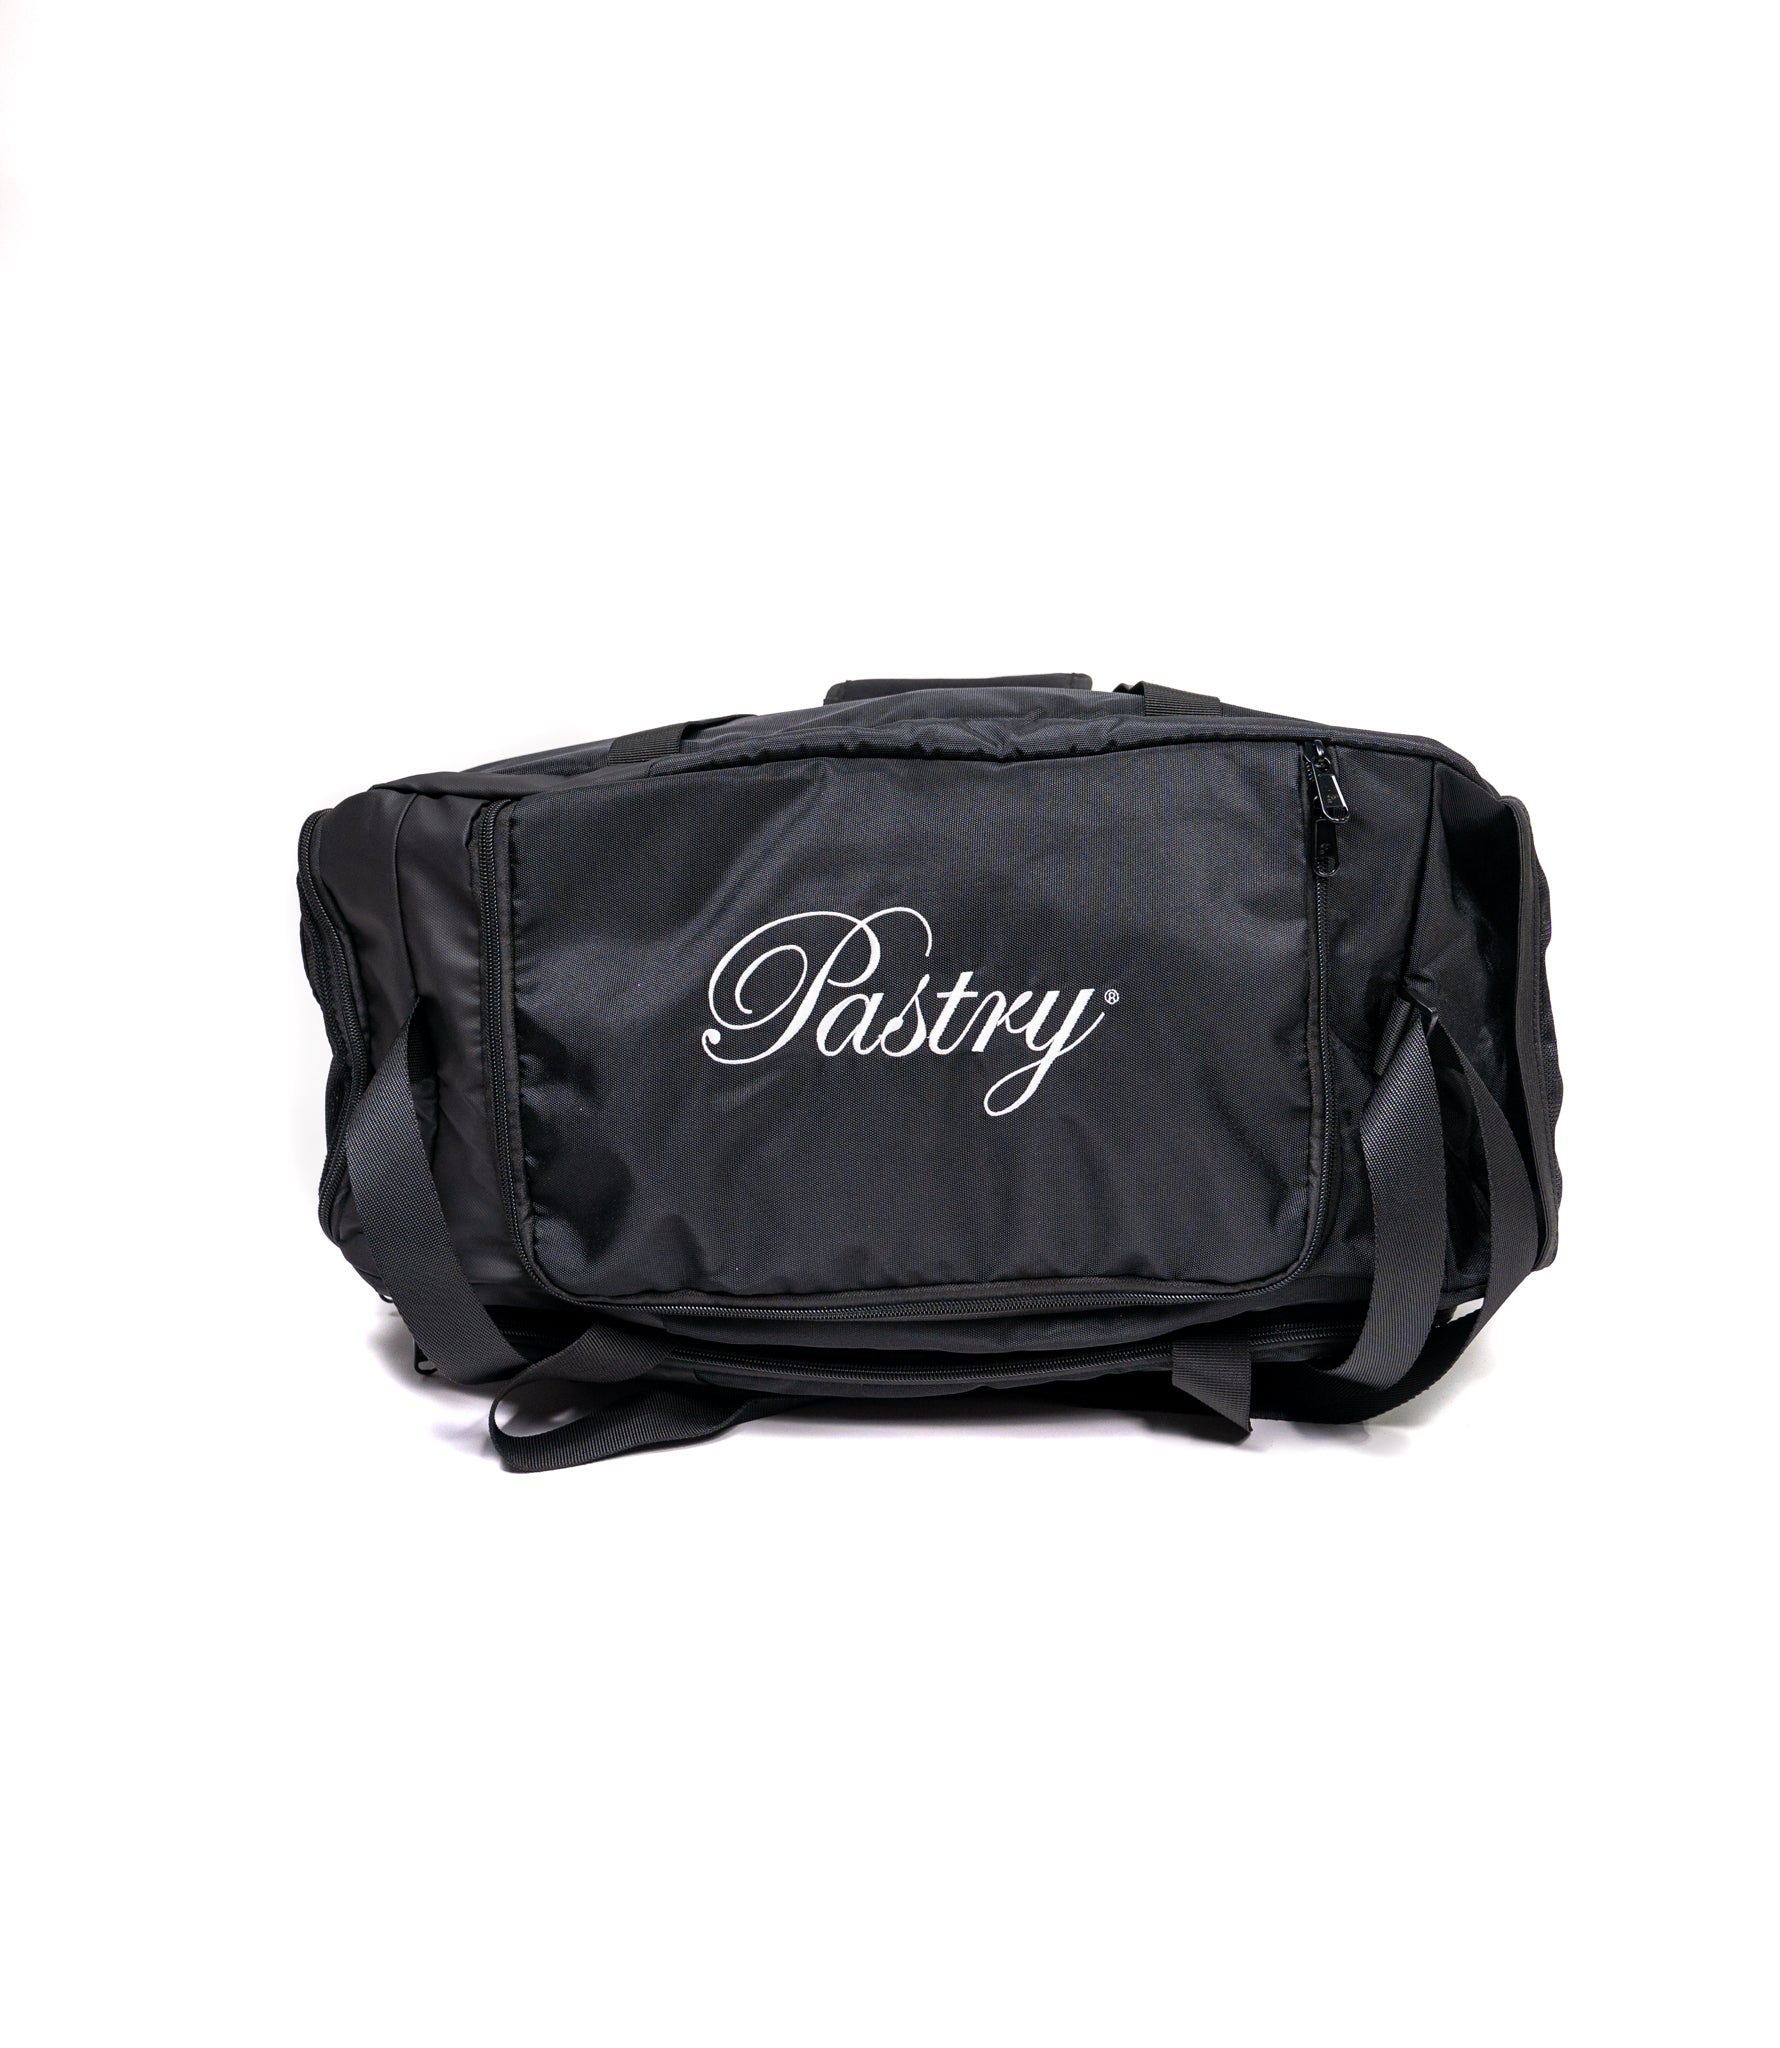 Pastry Duffle Bag Solid Black